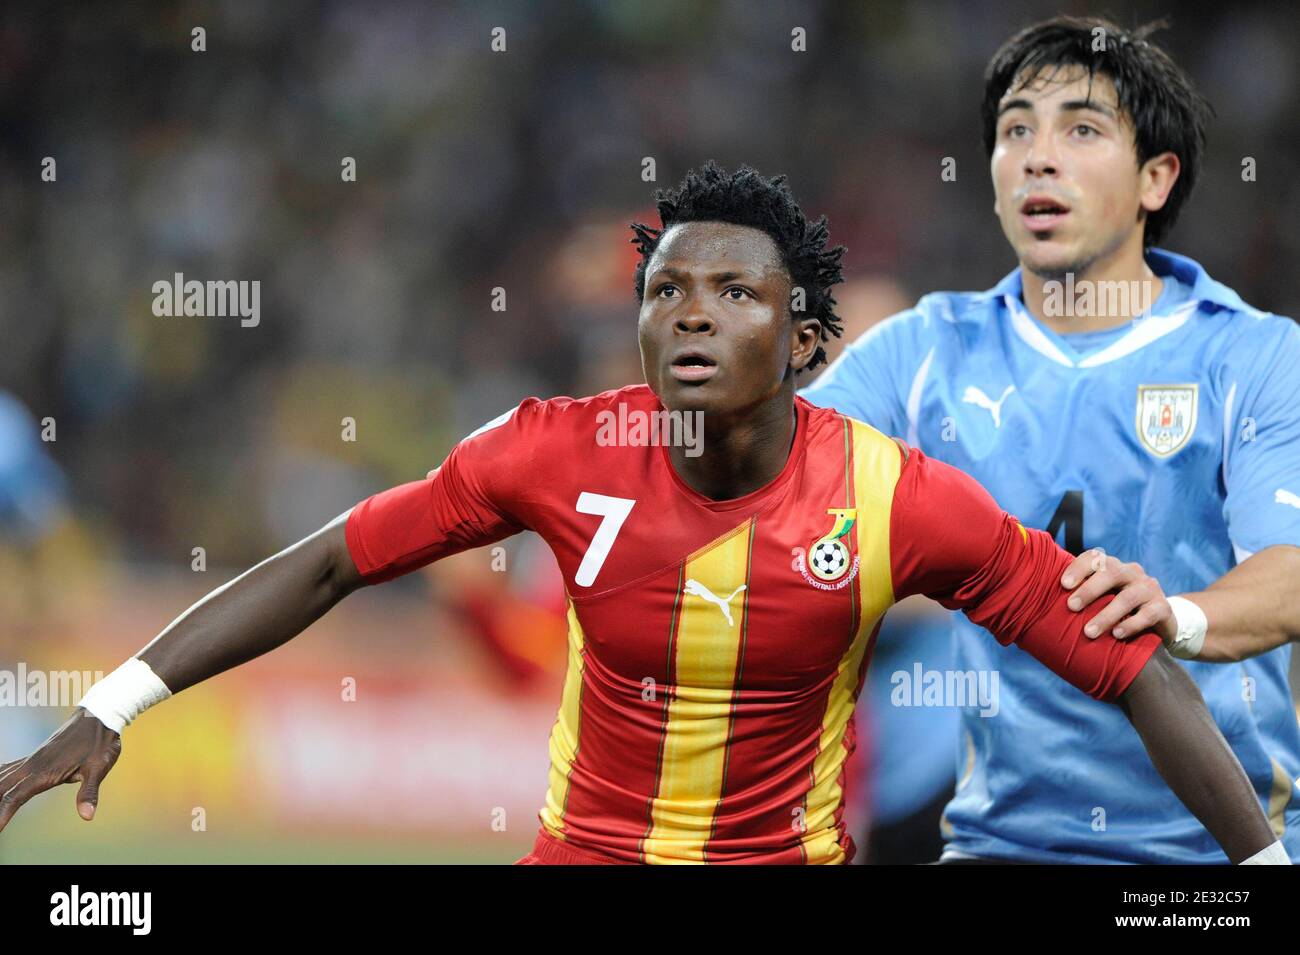 Ghana's Samuel Inkoom battles for the ball with Uruguay's Jorge Fucile during the 2010 FIFA World Cup South Africa, Quarter Final, Soccer match, Ghana vs Uruguay at Soccer City football stadium in Johannesburg, South Africa on July 2nd, 2010. Uruguay won 0-0 (5p to 4). Photo by Henri Szwarc/ABACAPRESS.COM Stock Photo